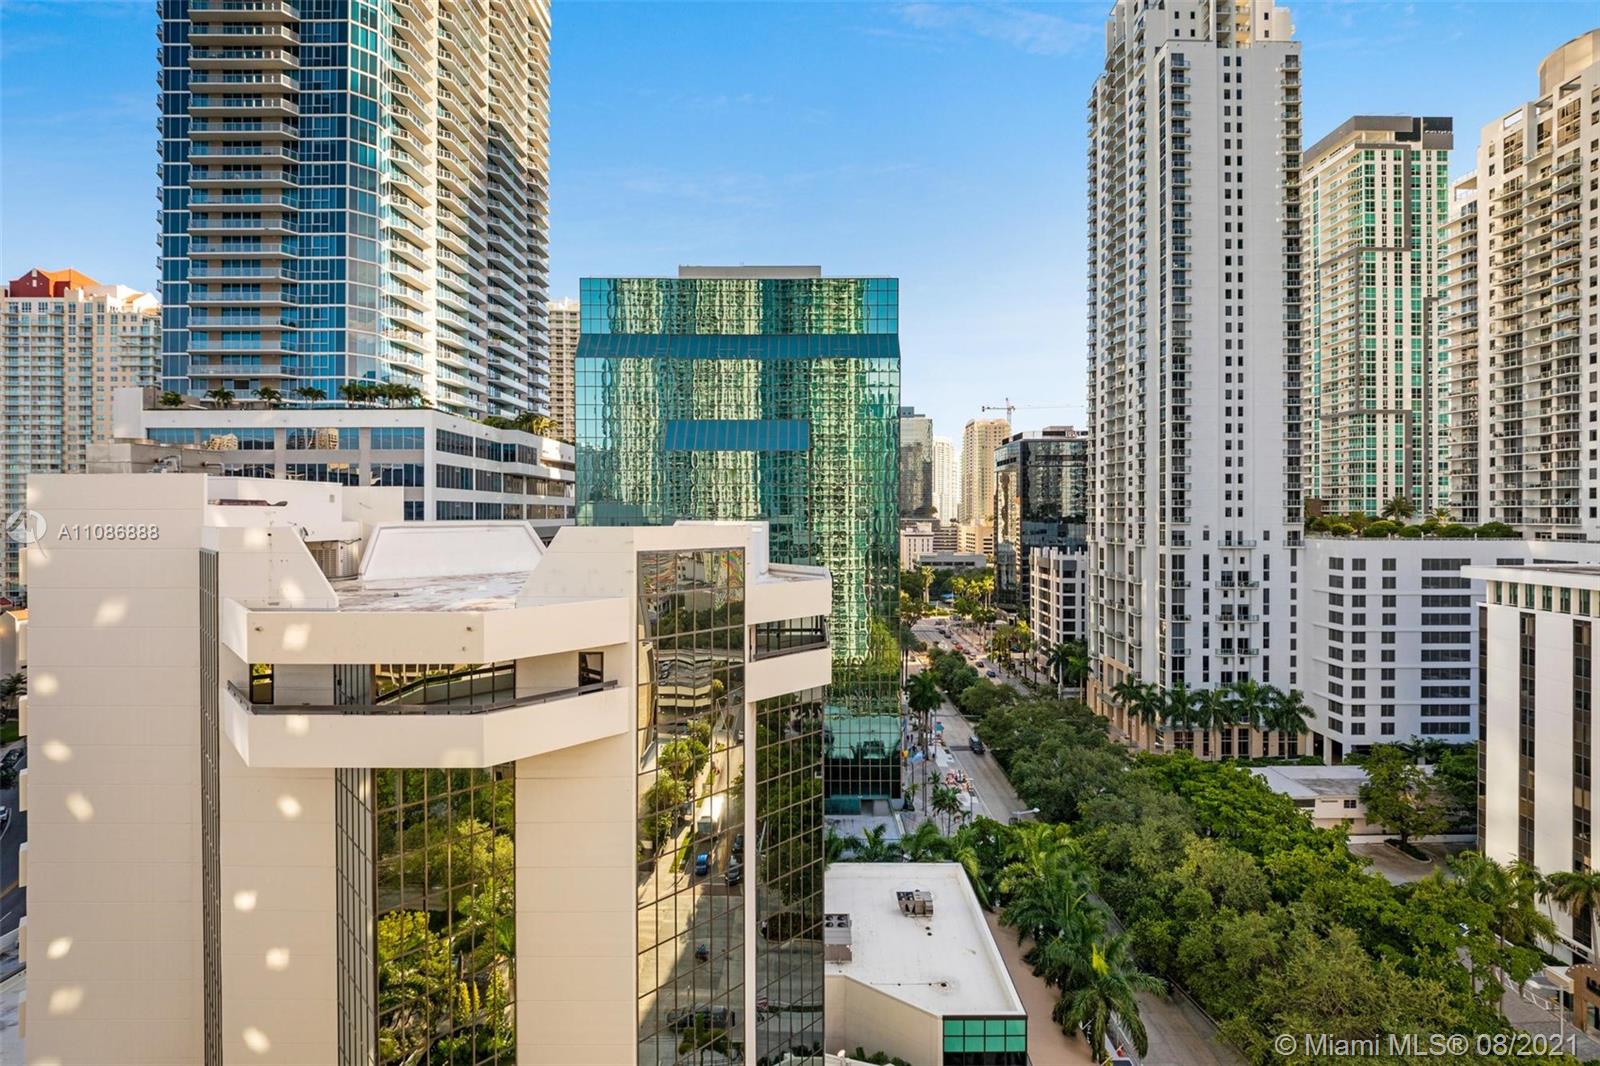 The Plaza on Brickell South image #21